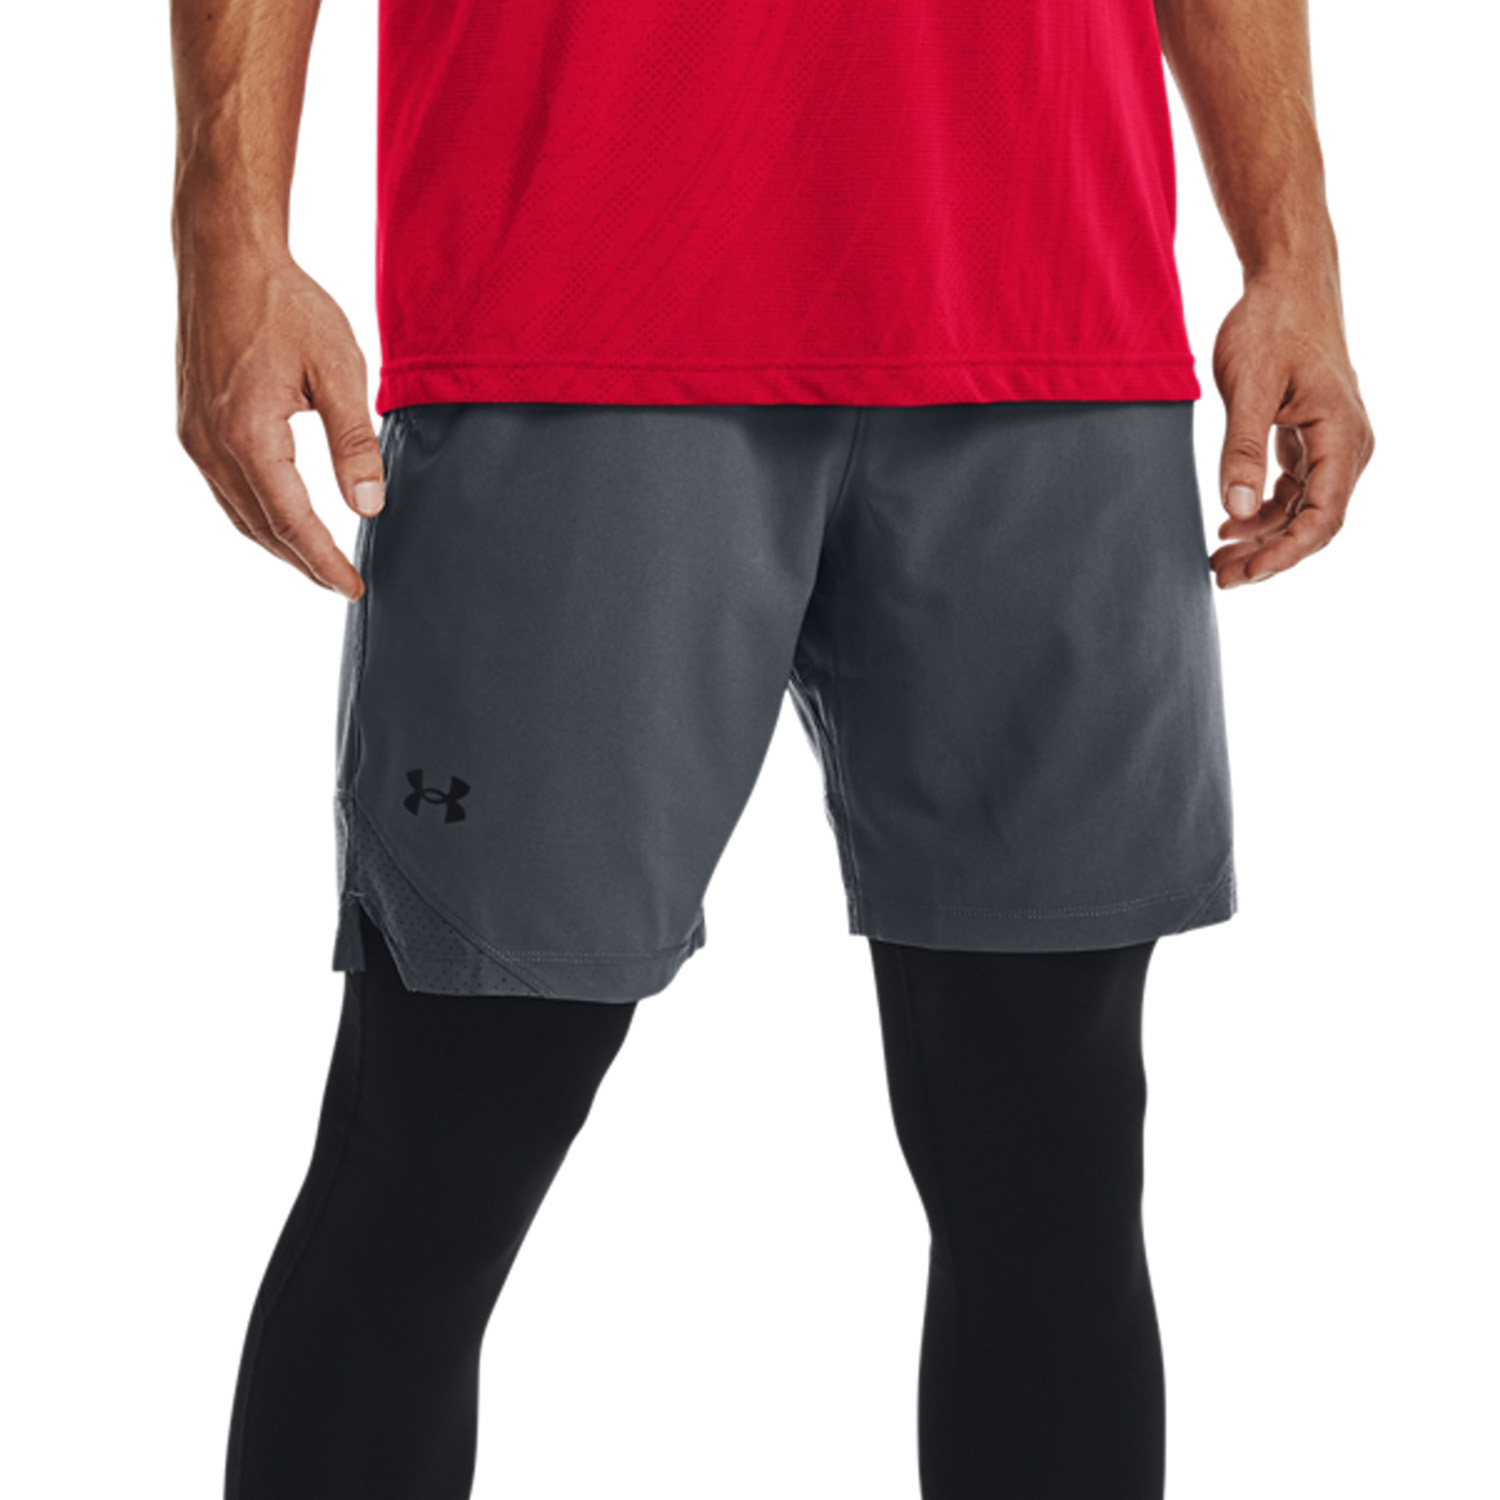 Under Armour Vanish Woven 8in Shorts - Pitch Gray/Black